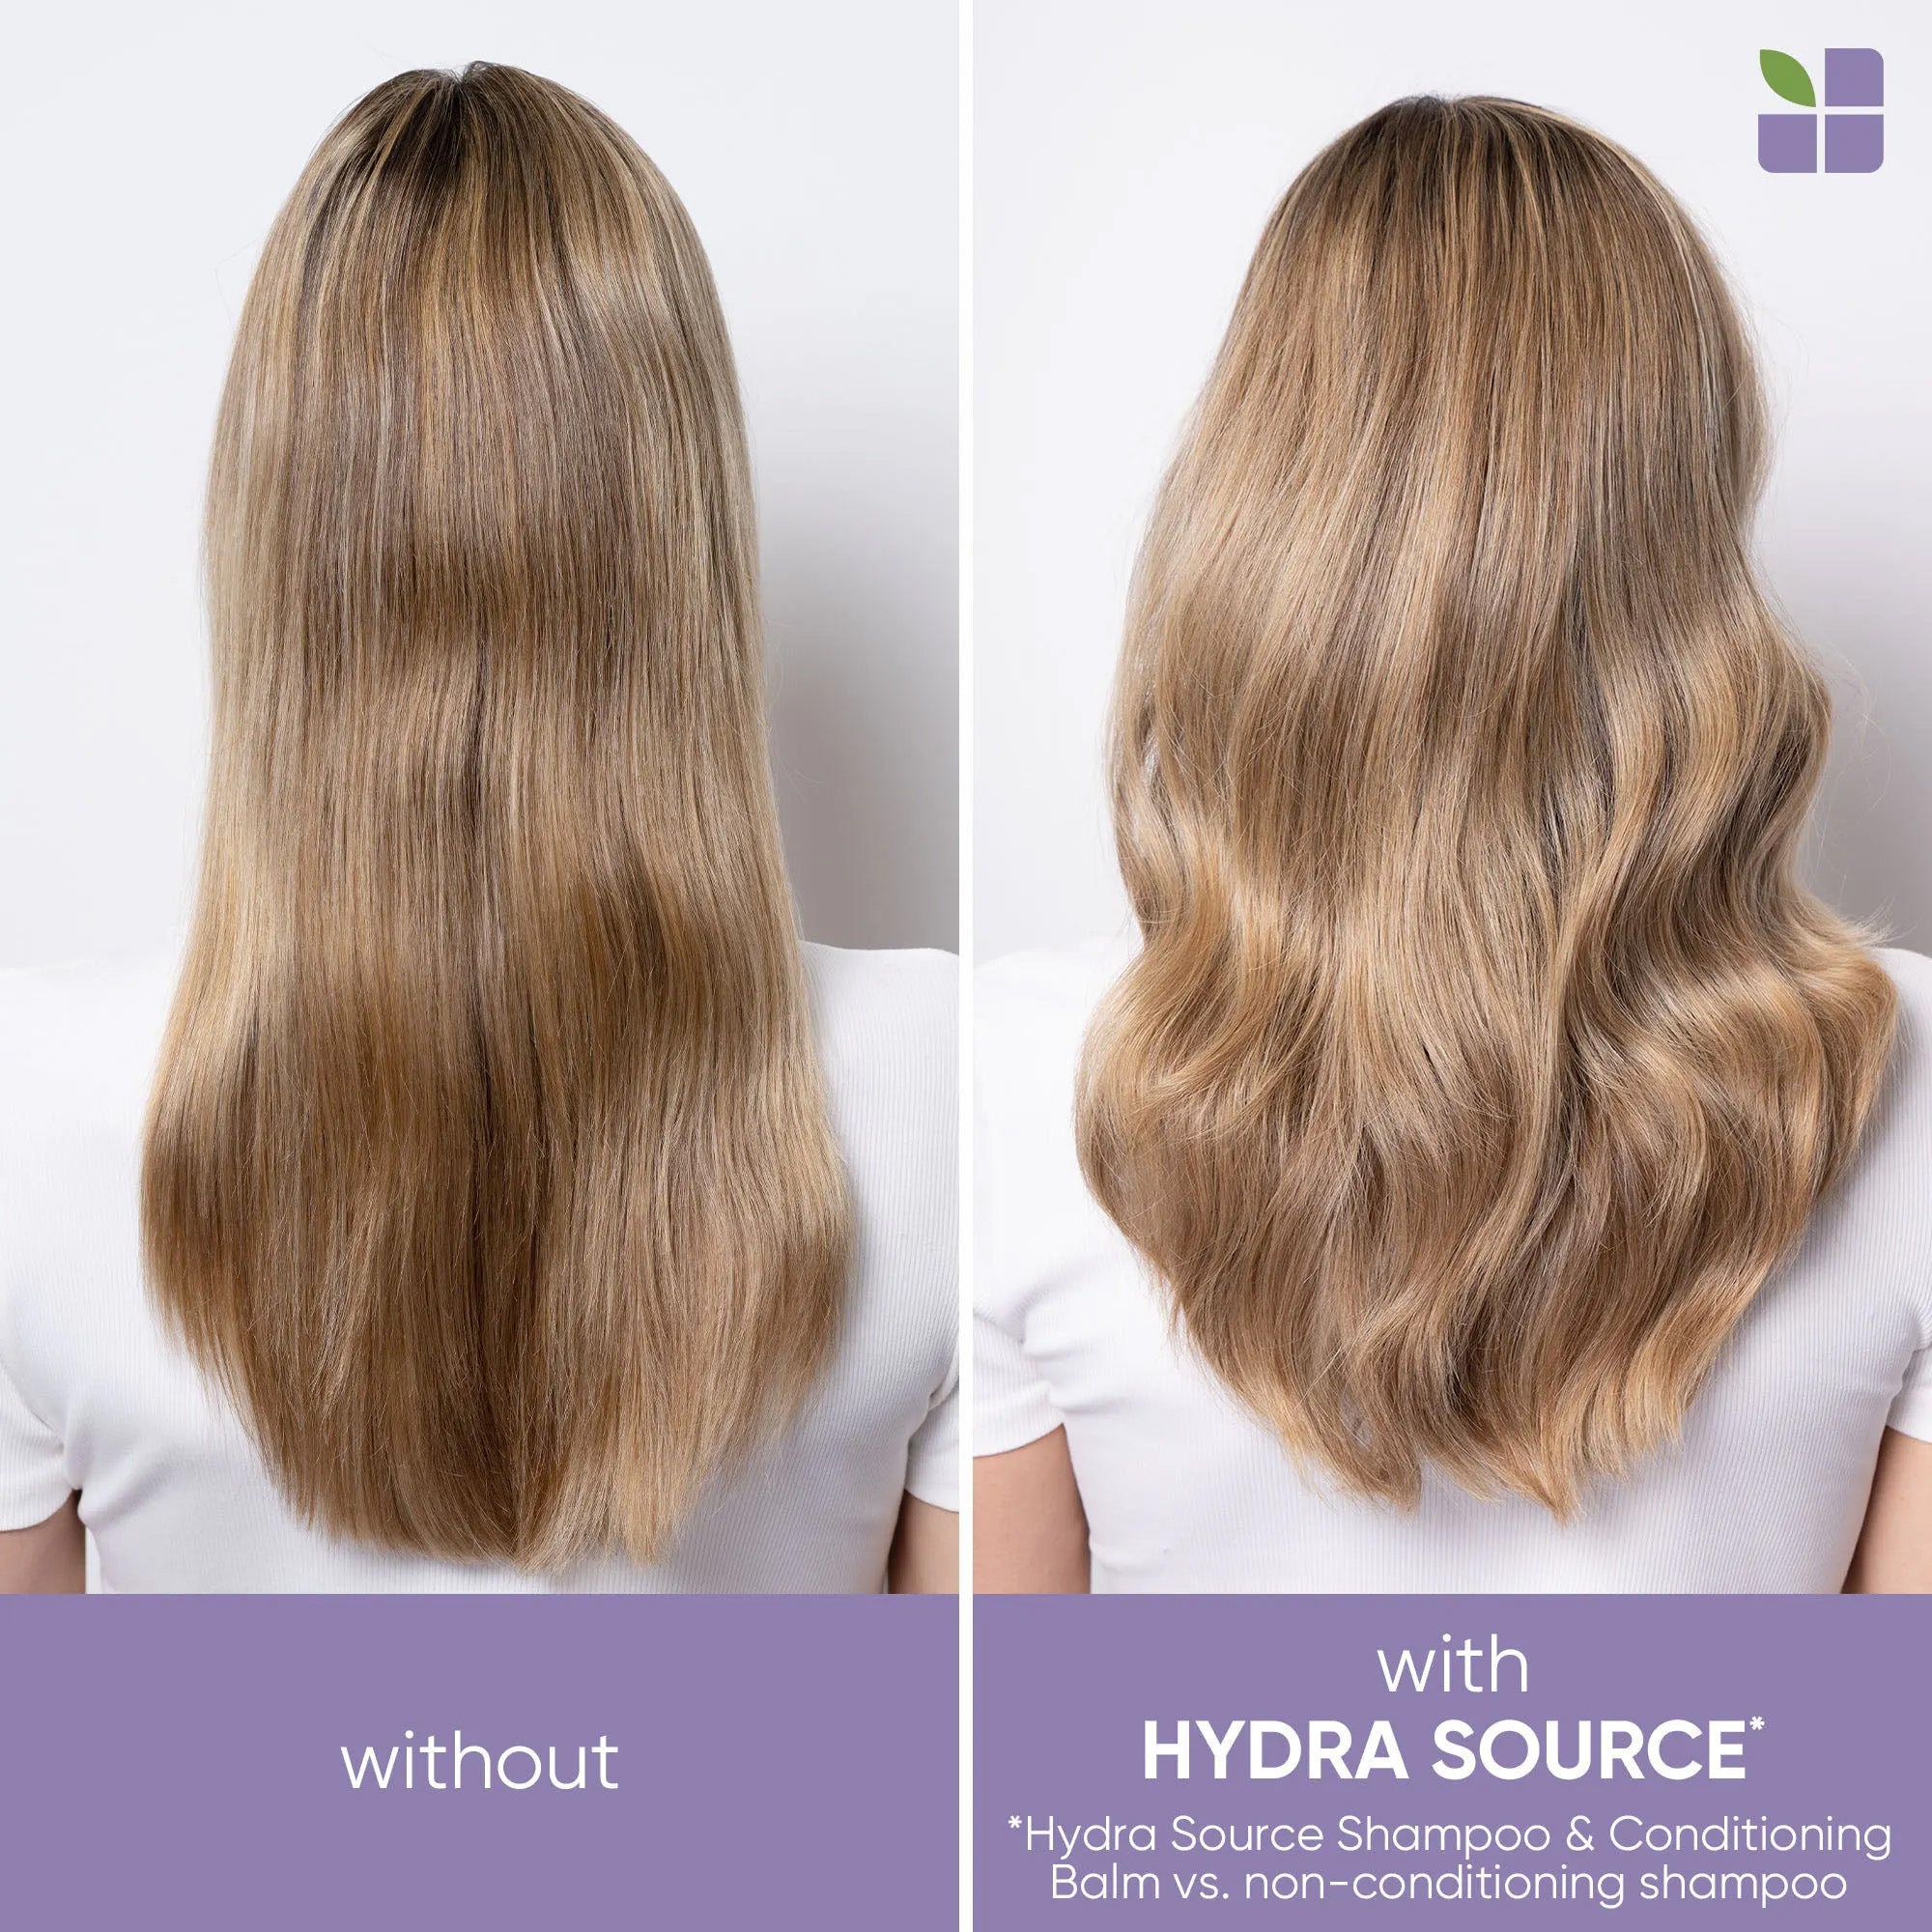 Before and After using Biolage Hydrasource.